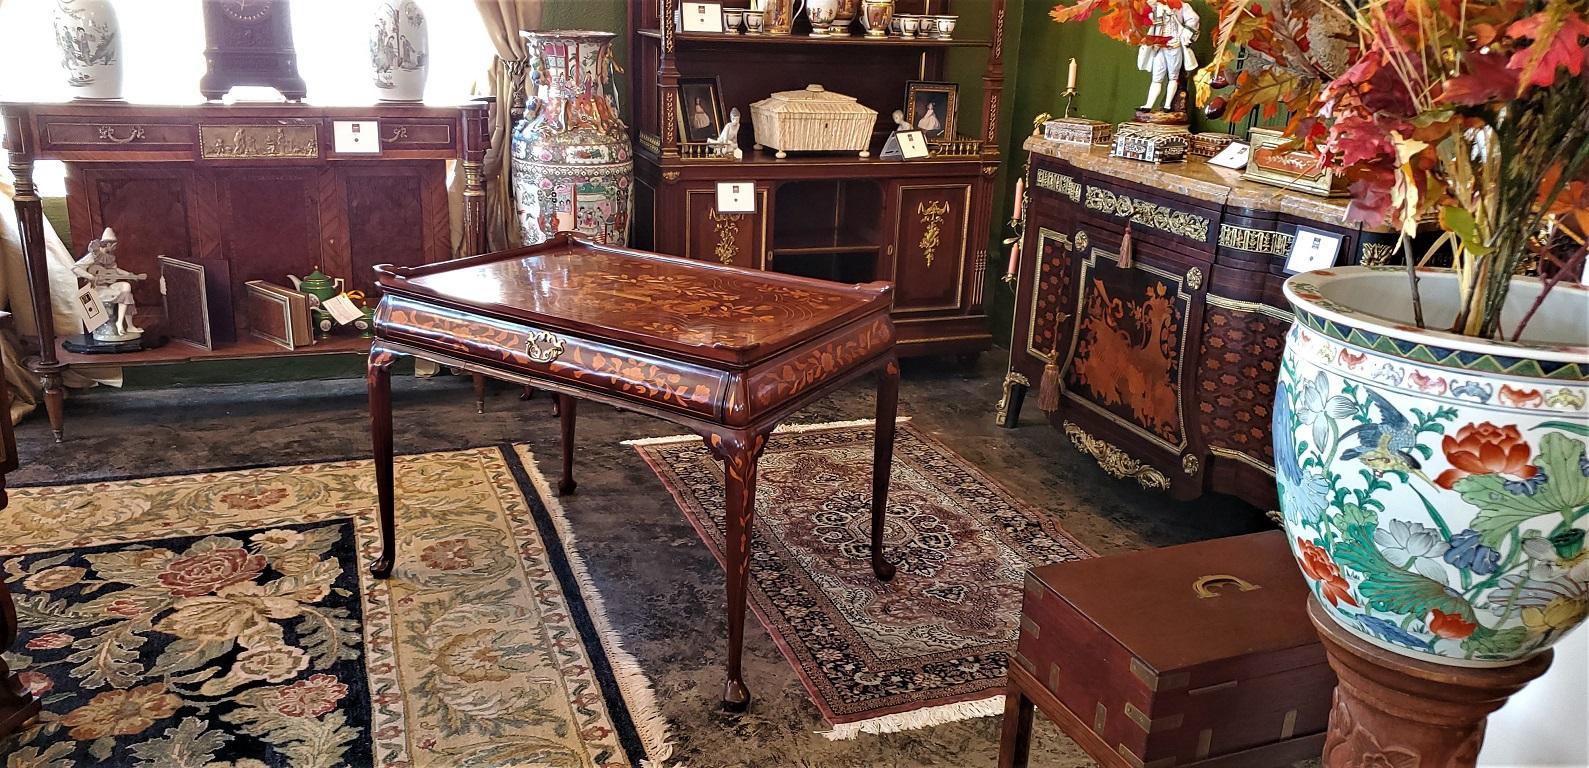 Presenting an absolutely stunning and exceptional 18th century Dutch Marquetry silver table.

Made in the Netherlands circa 1780, the silver table is made of walnut and rosewood with profuse marquetry inlays in satinwood, kingwood and hare wood,